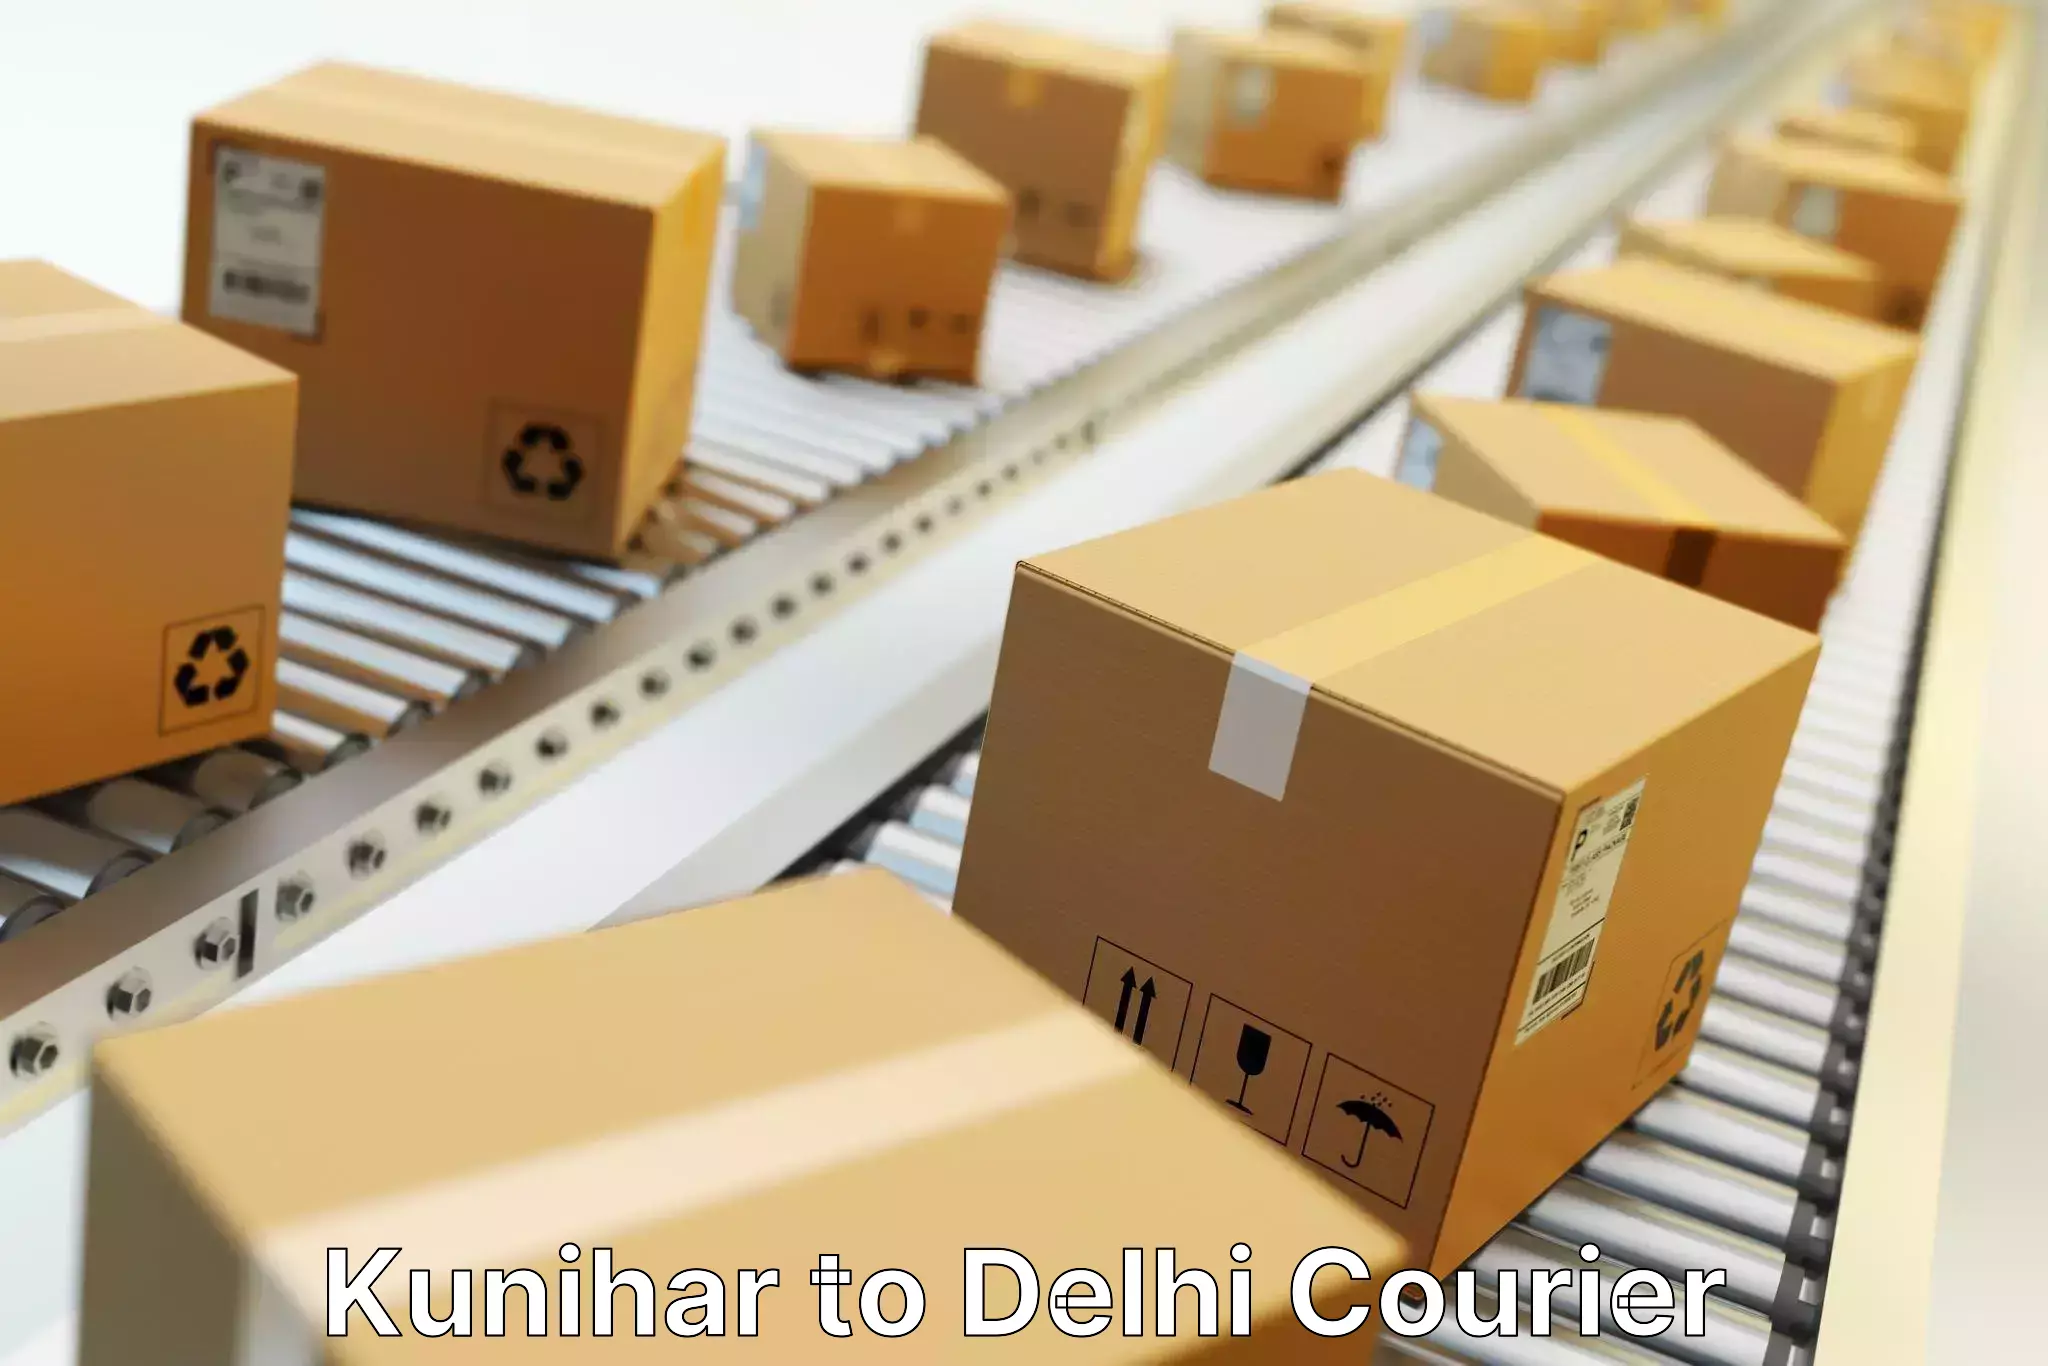 End-to-end delivery in Kunihar to Delhi